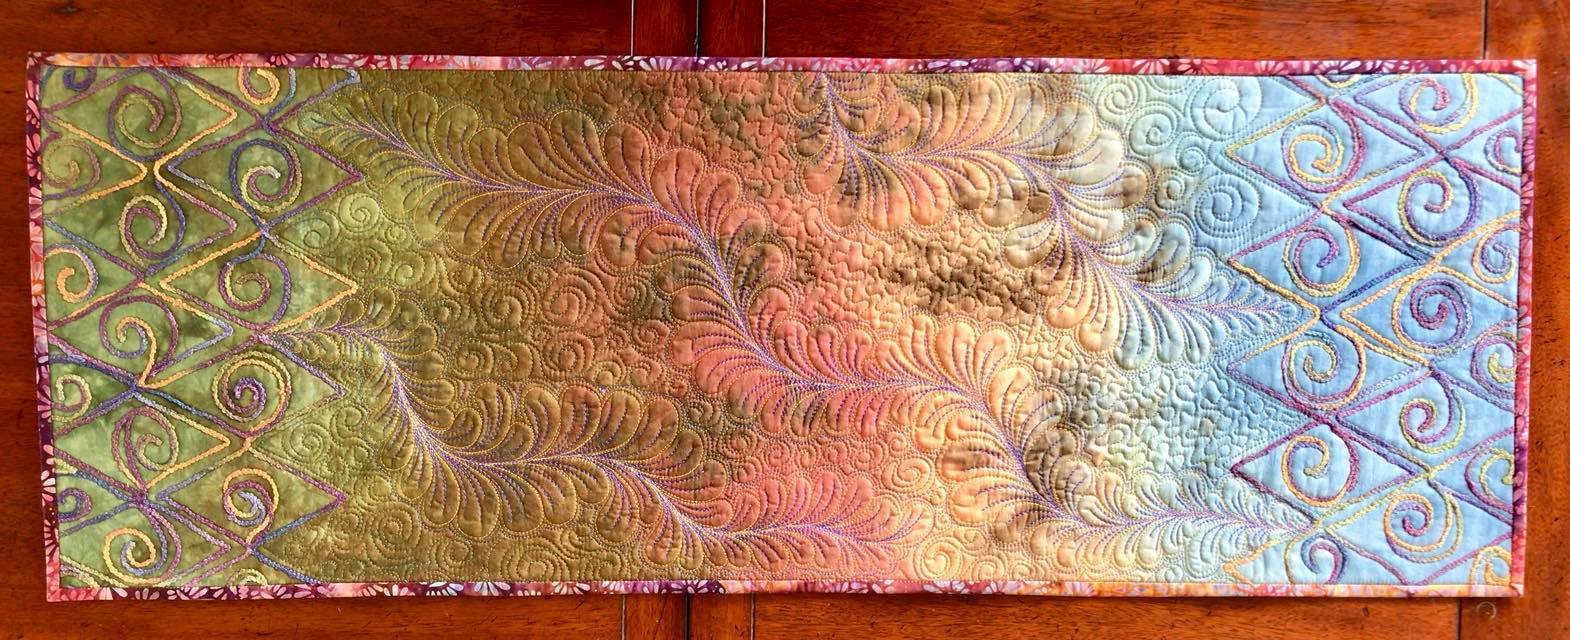 Leslie McNeil hand dyed fabric